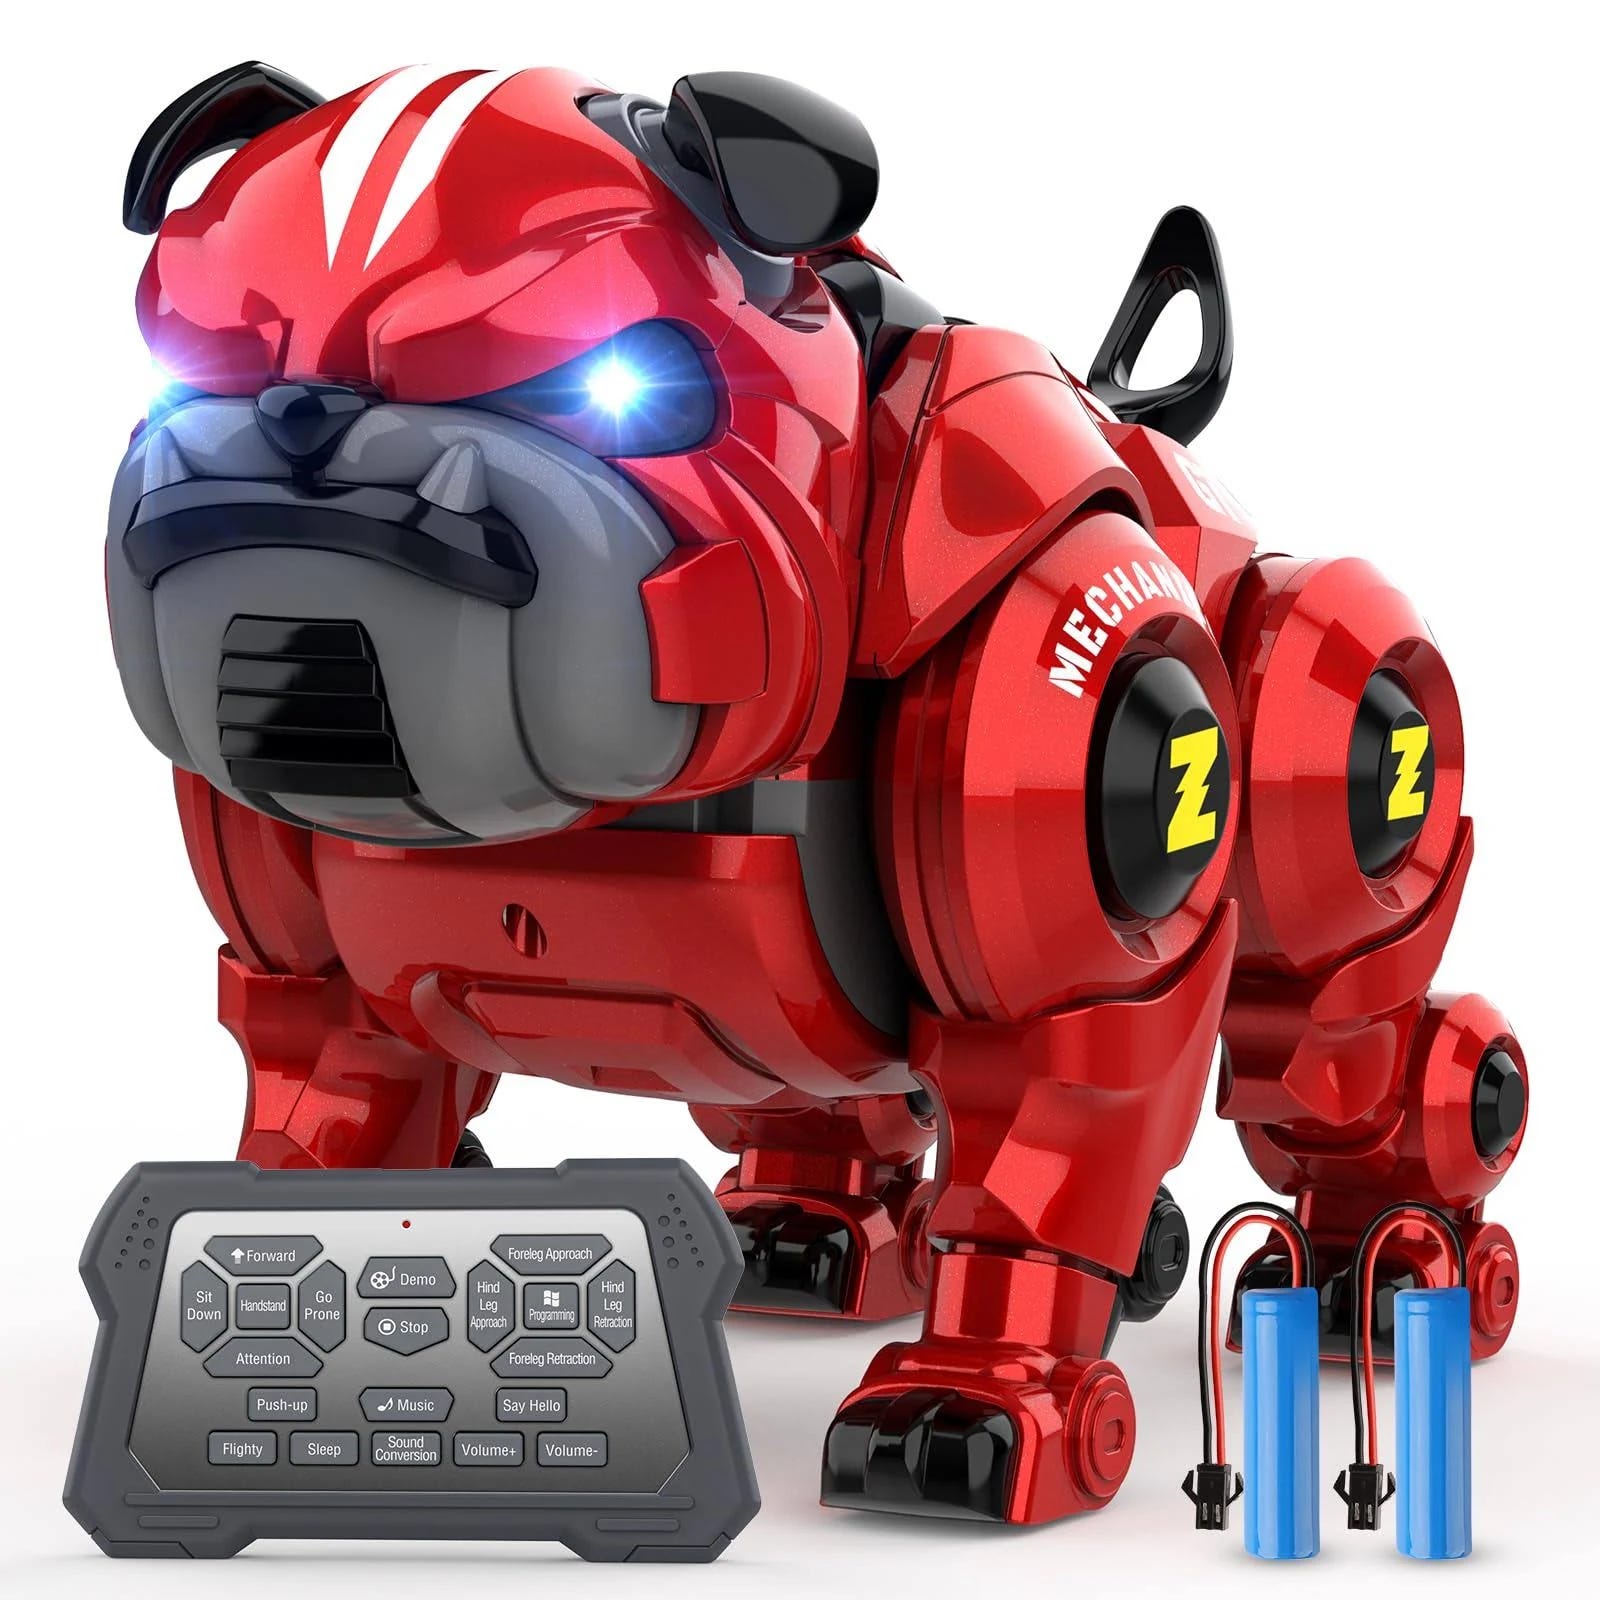 Lterfear Robot Dog: Fun Singing, Dancing, Touch Functionality | Image